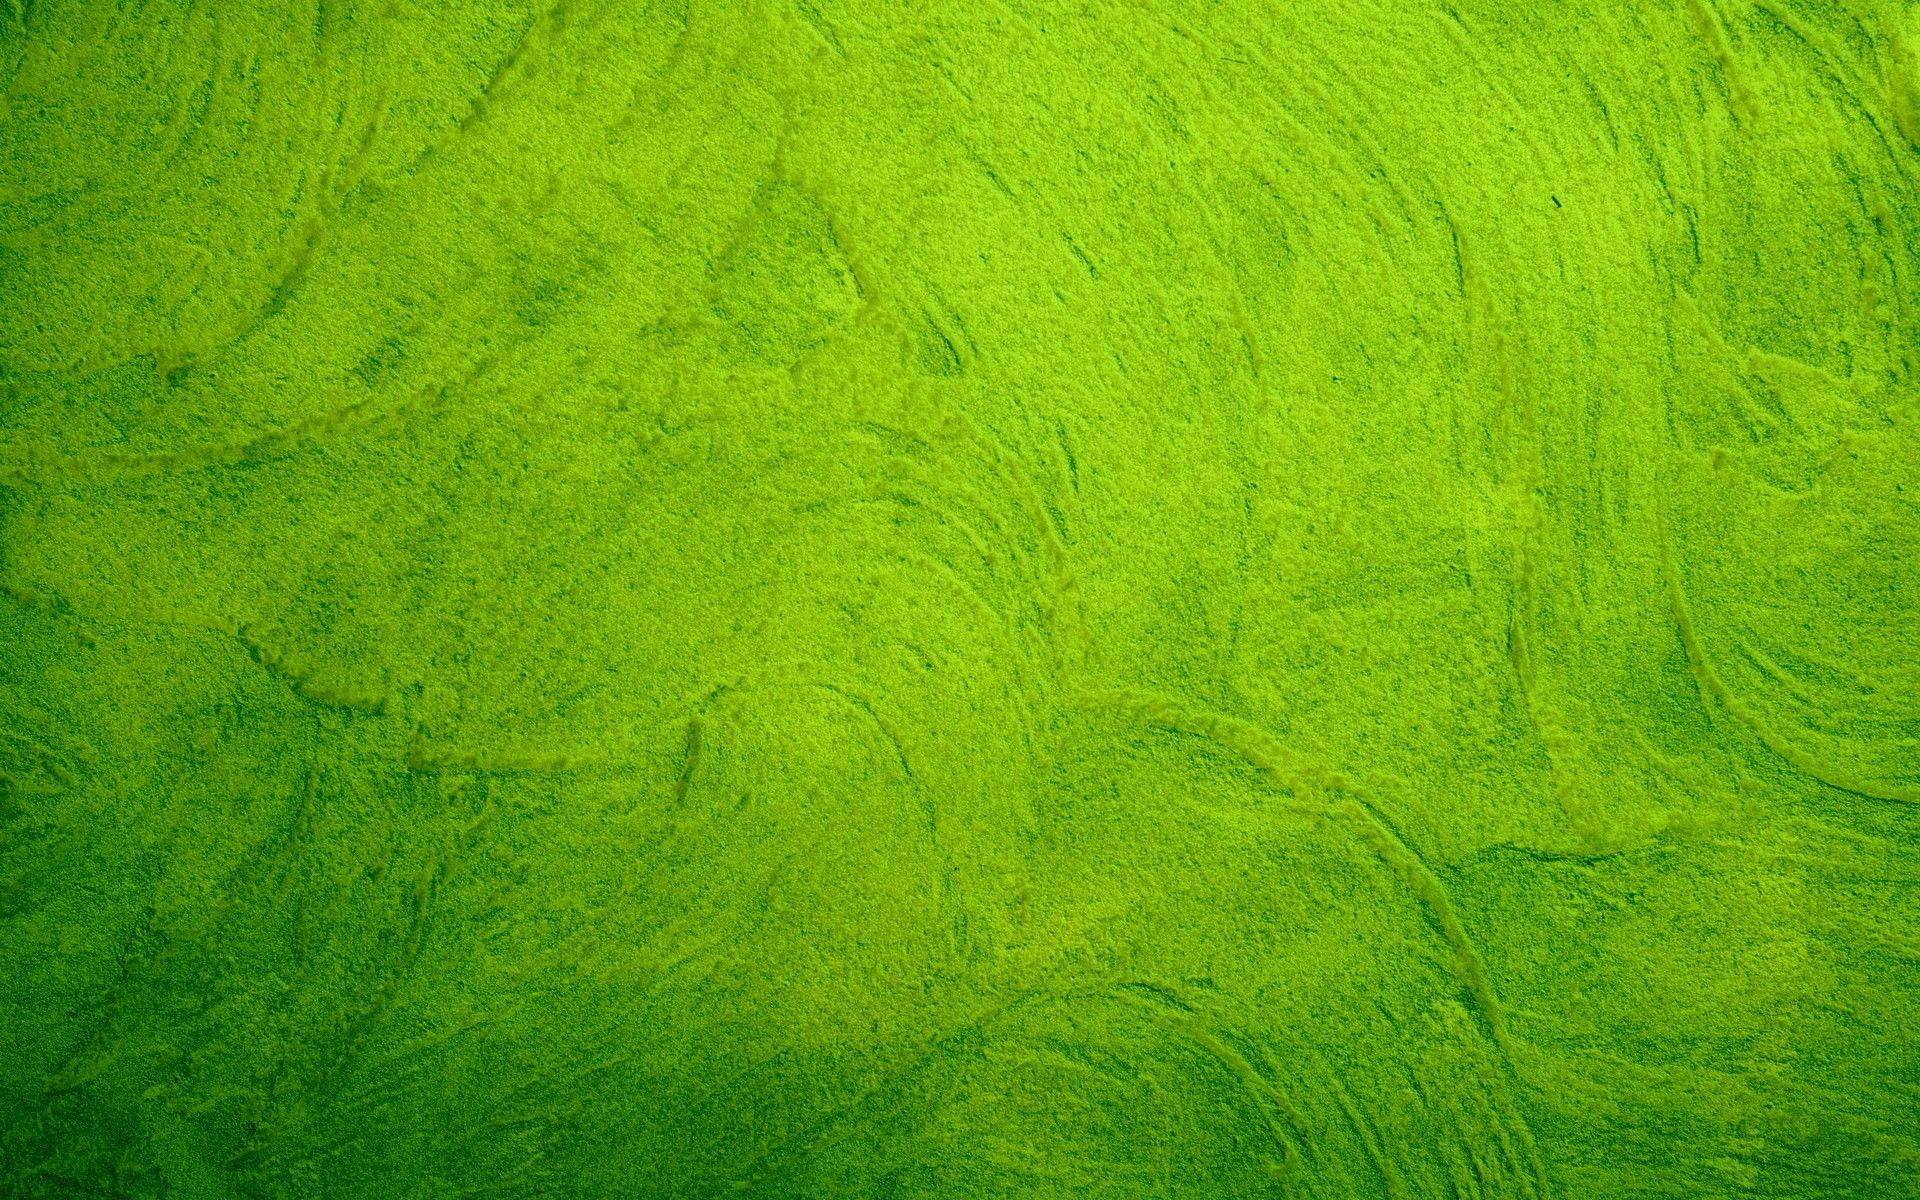 Green Leather Texture Hd. Cheap Green Leather With Green